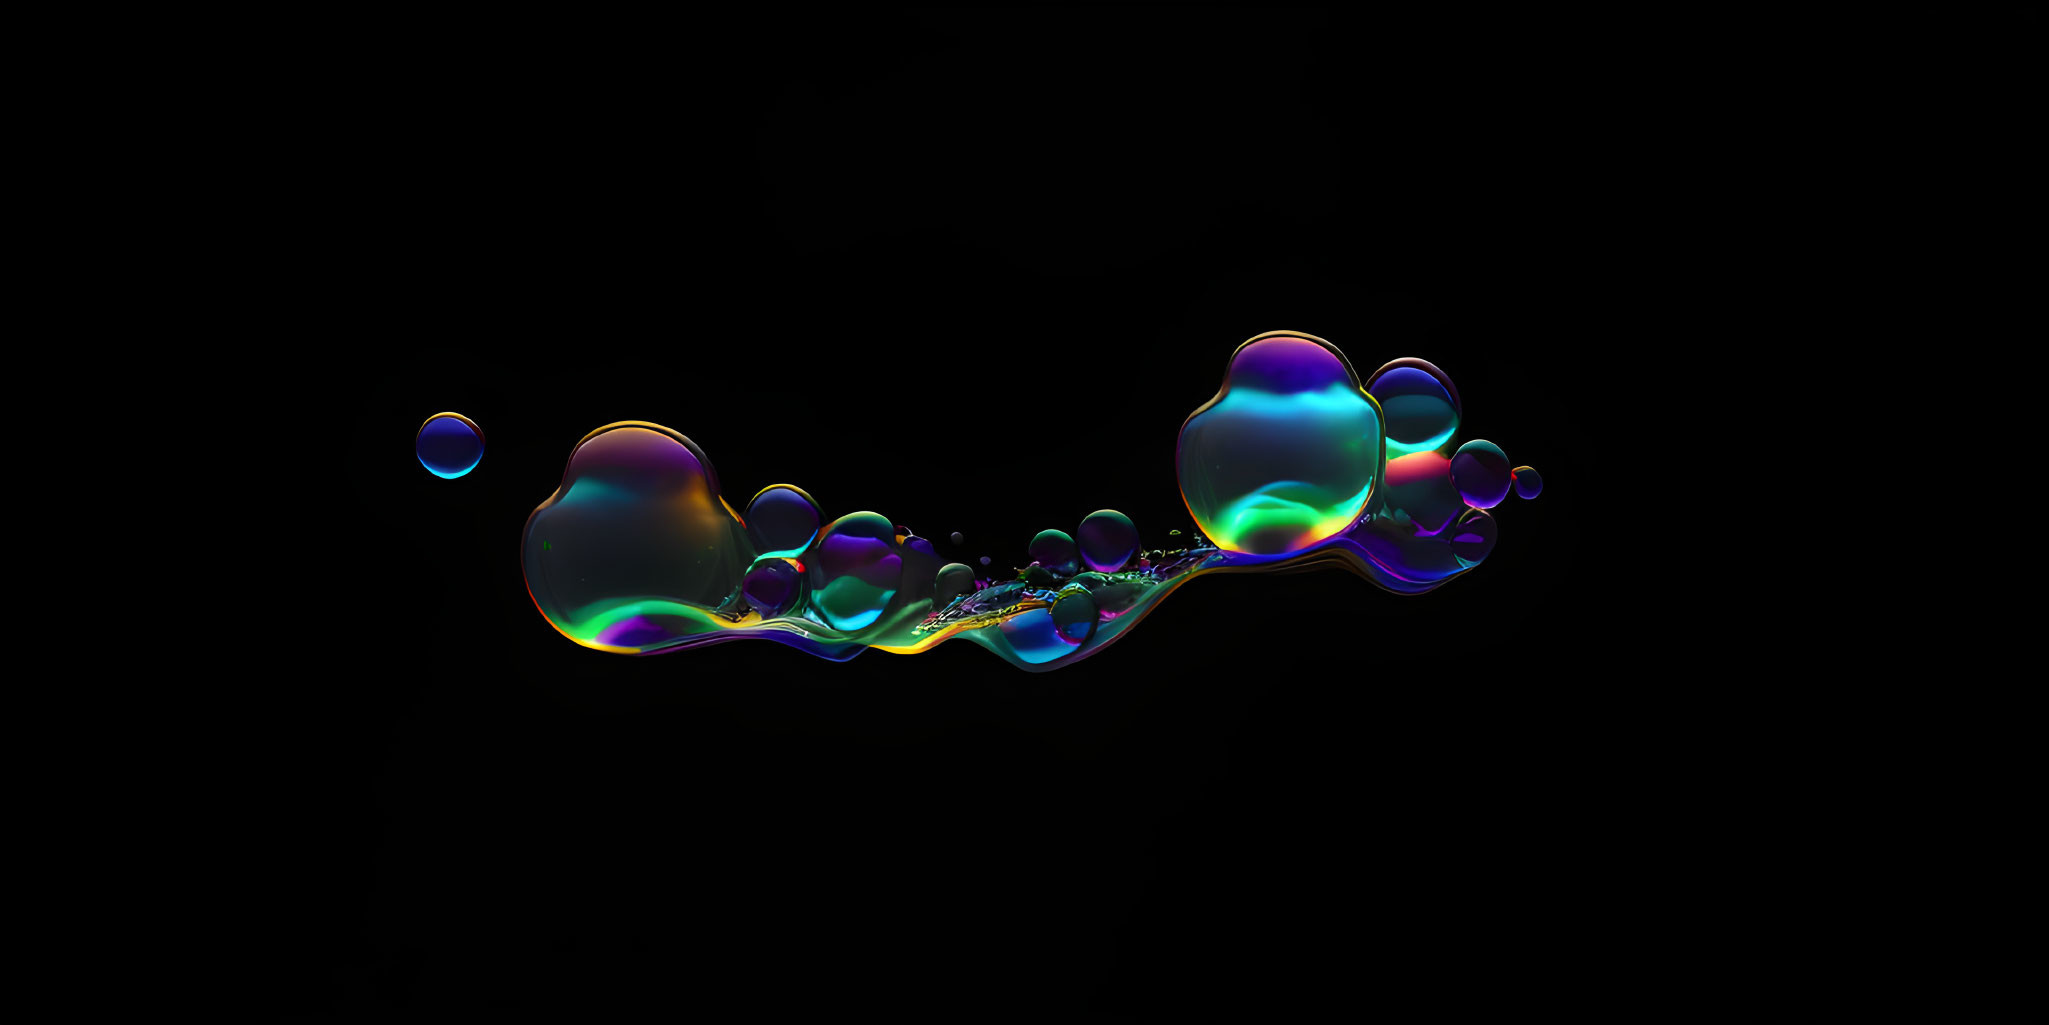 Iridescent soap bubbles on black background: serpent-like formation